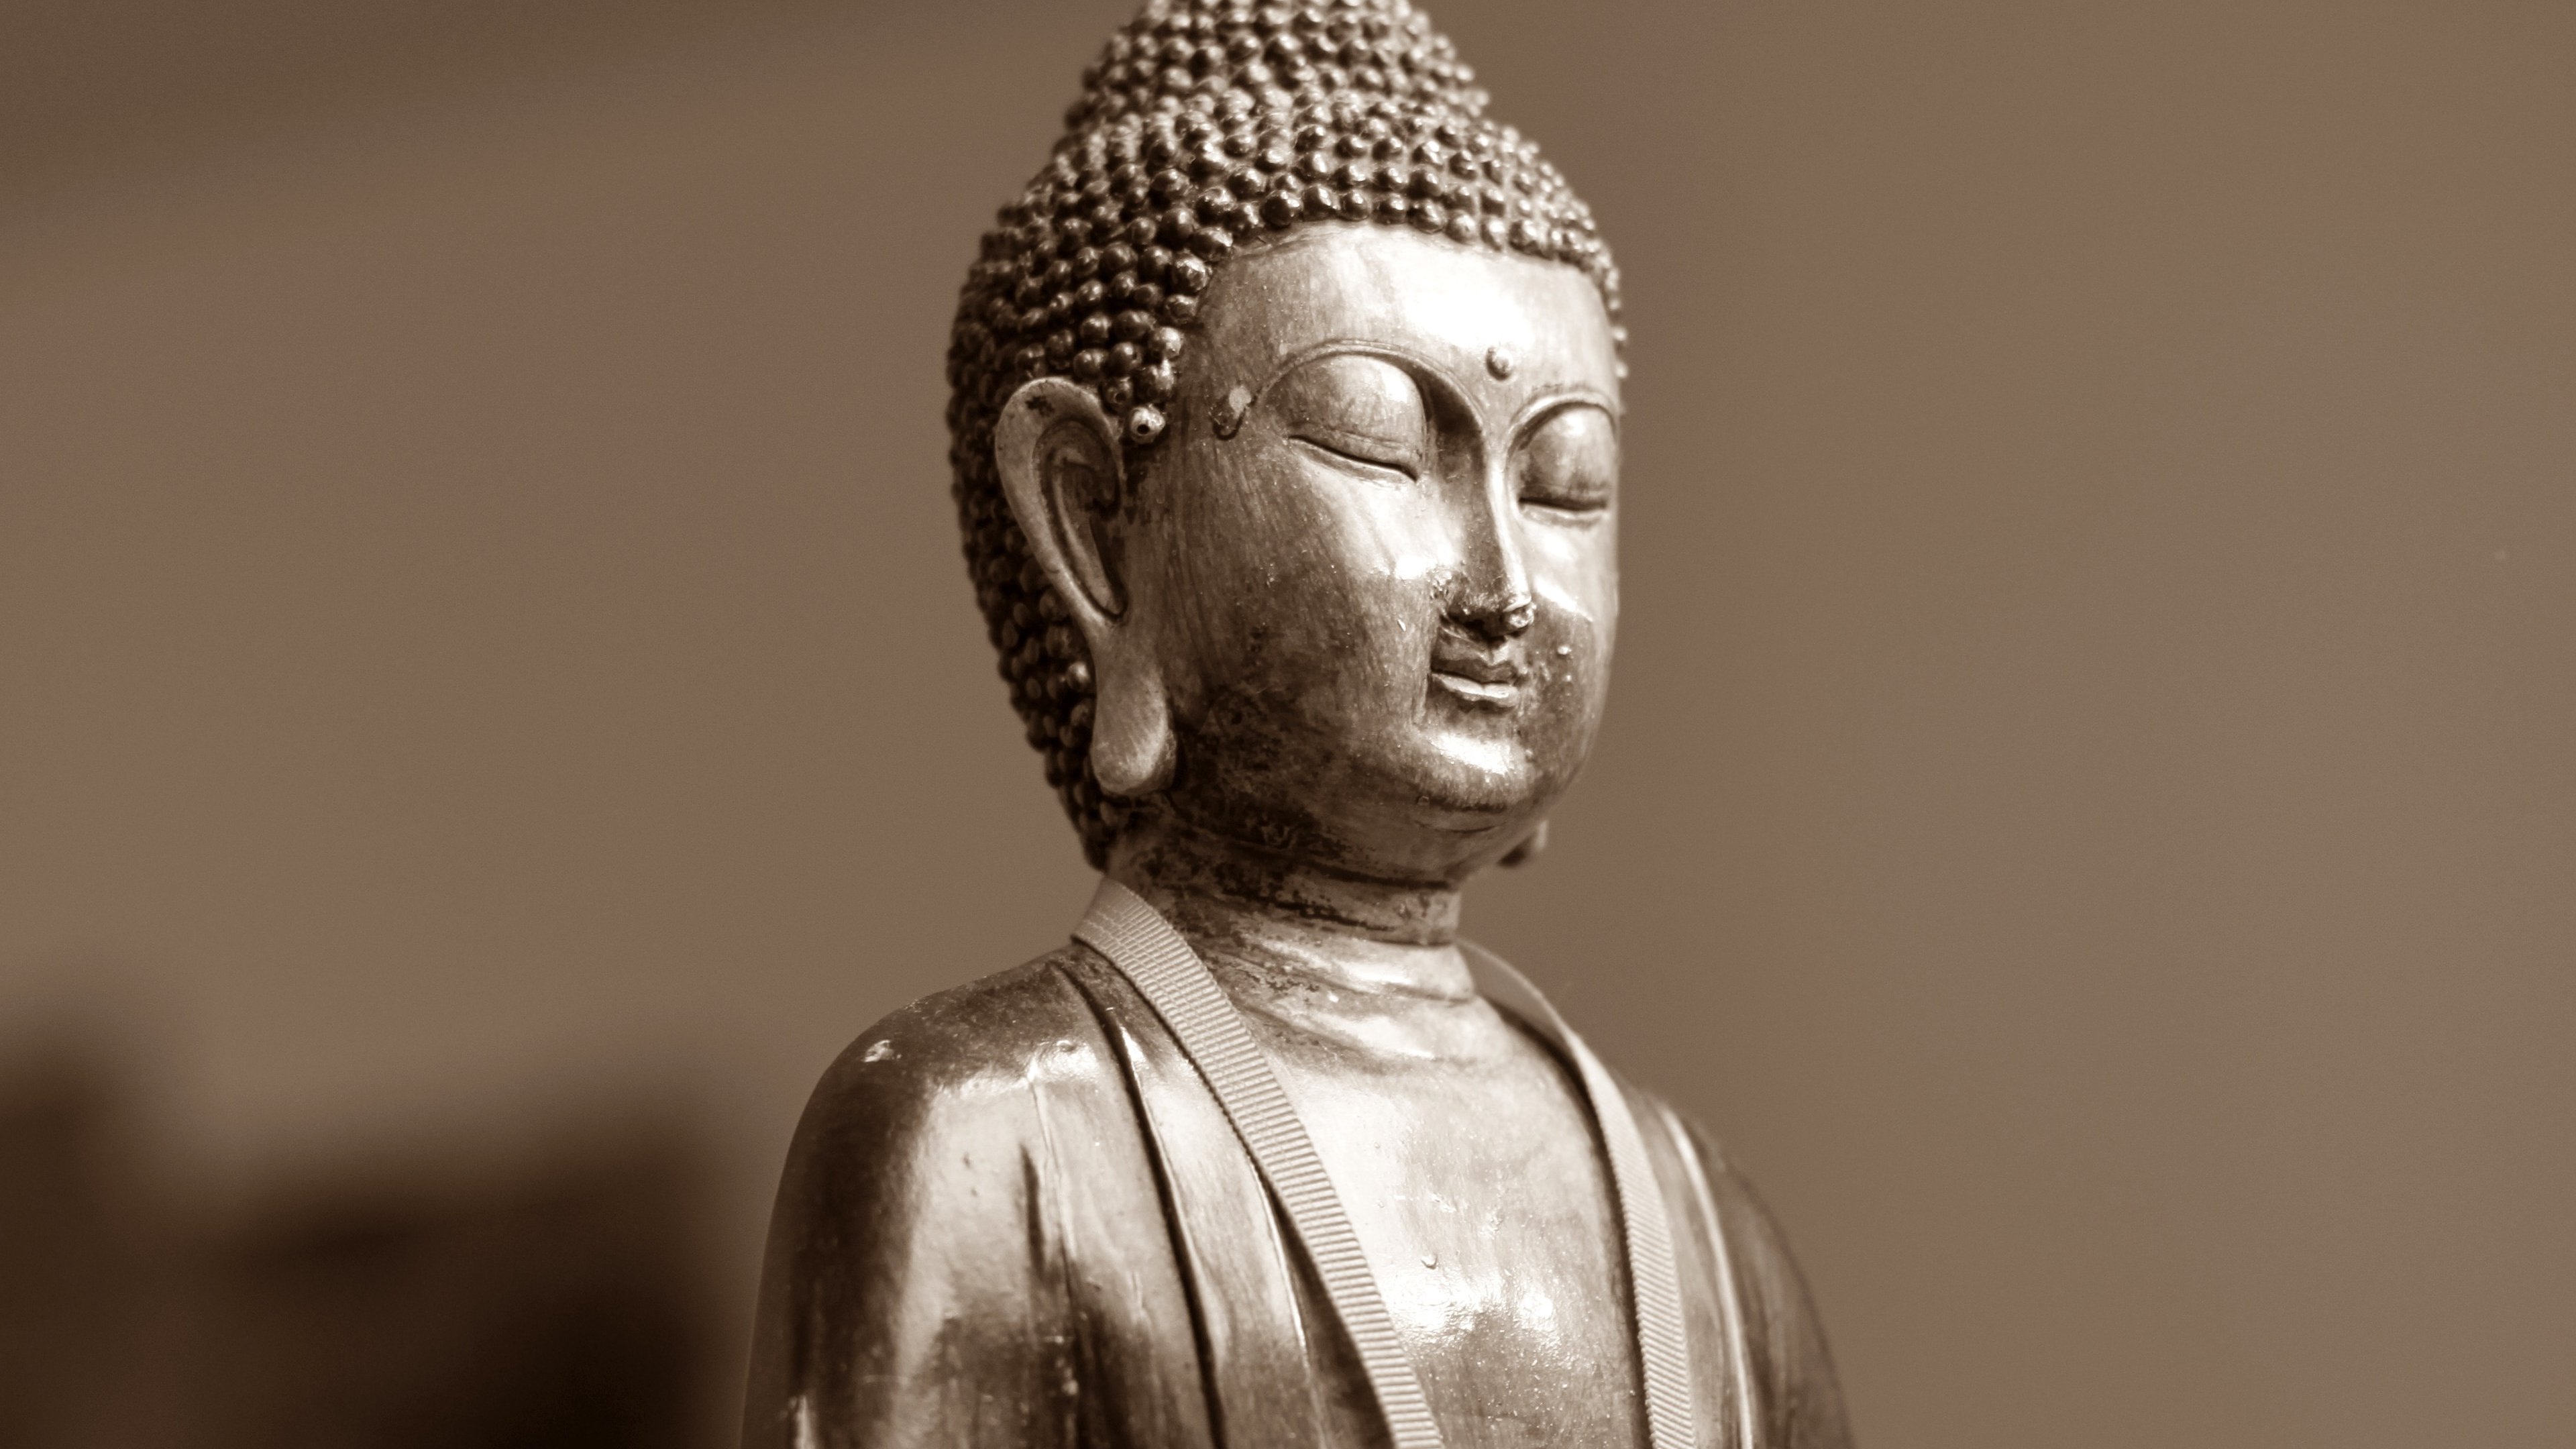 Buddha Statue Wallpaper - iPhone, Android & Desktop Backgrounds